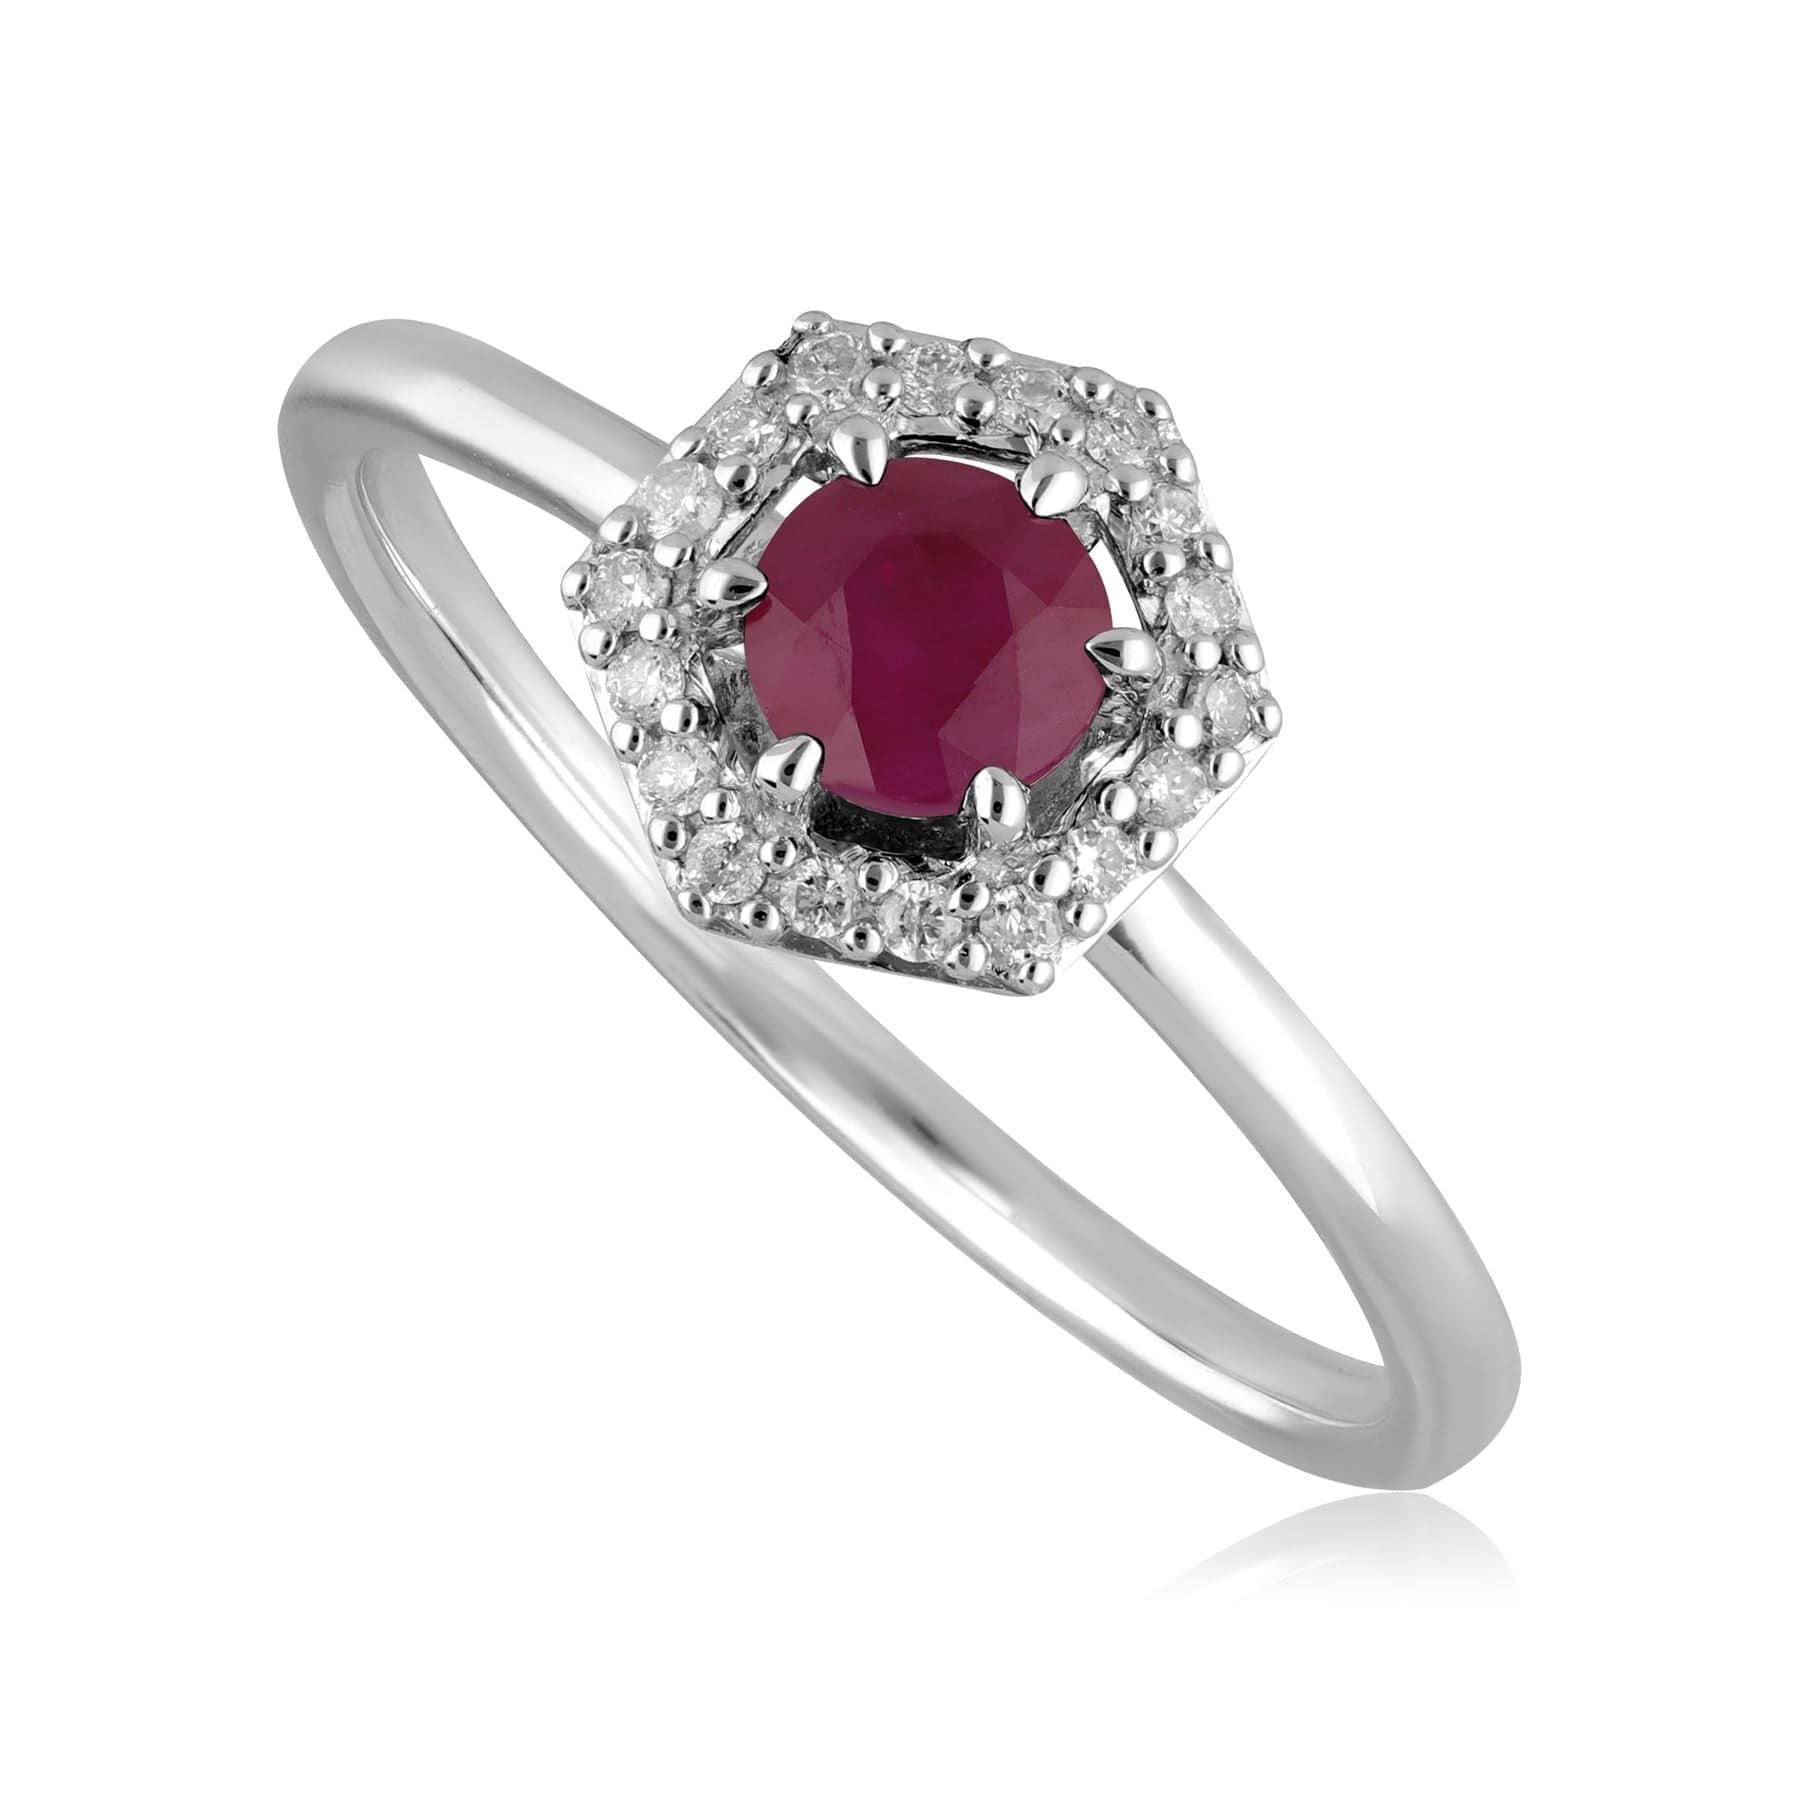 Image of 9ct White Gold 0.92ct Ruby & Diamond Halo Engagement Ring